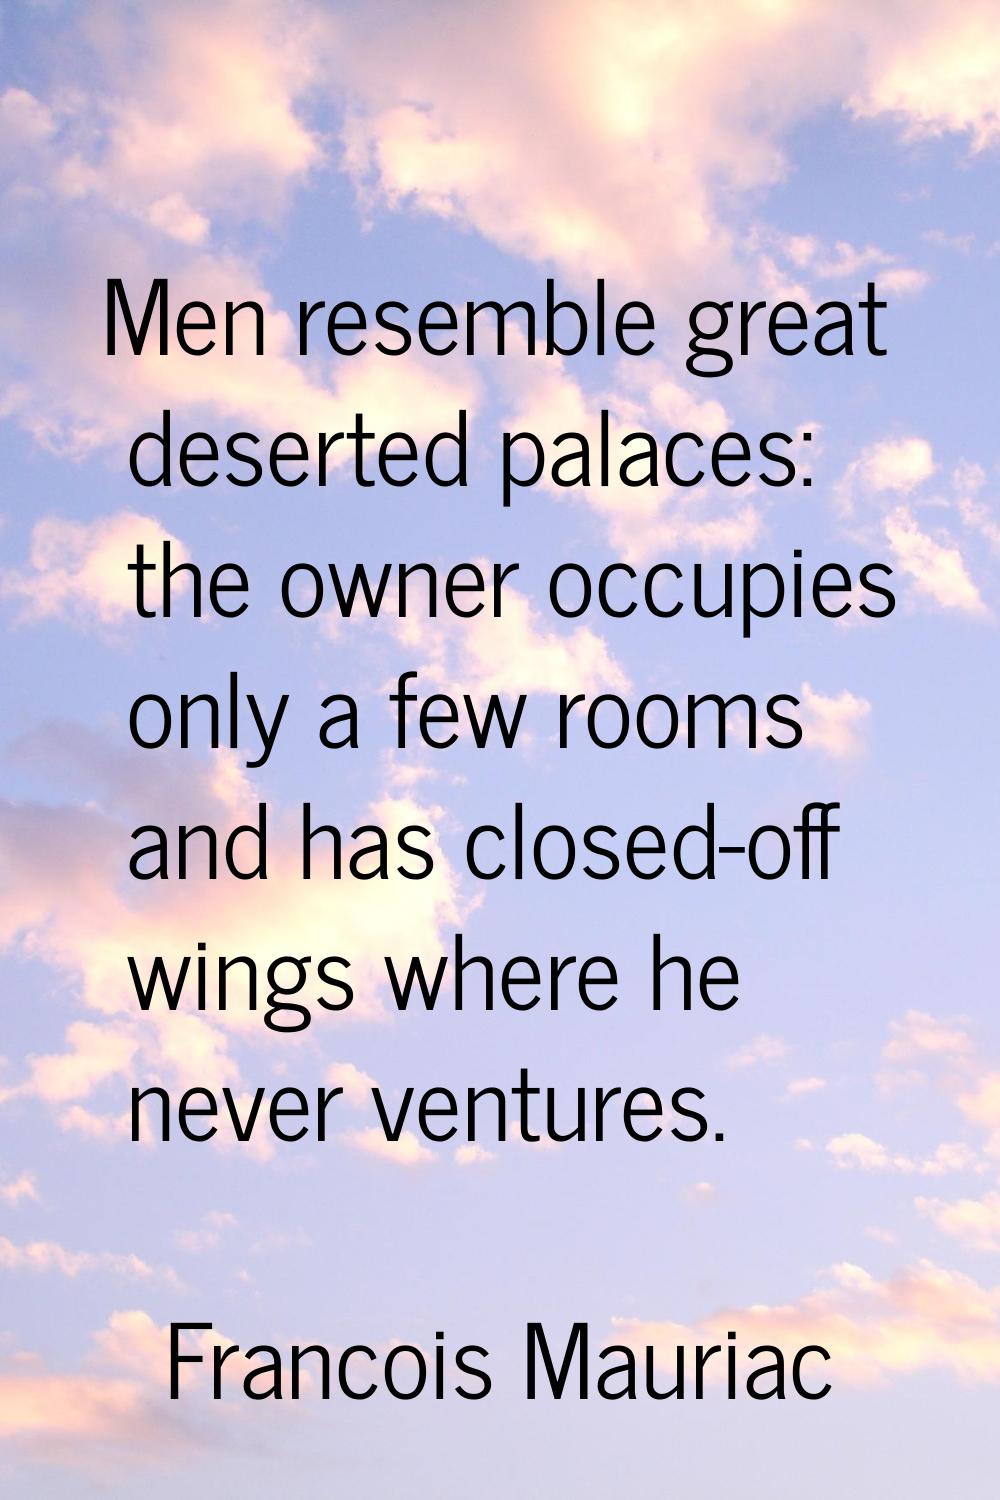 Men resemble great deserted palaces: the owner occupies only a few rooms and has closed-off wings w